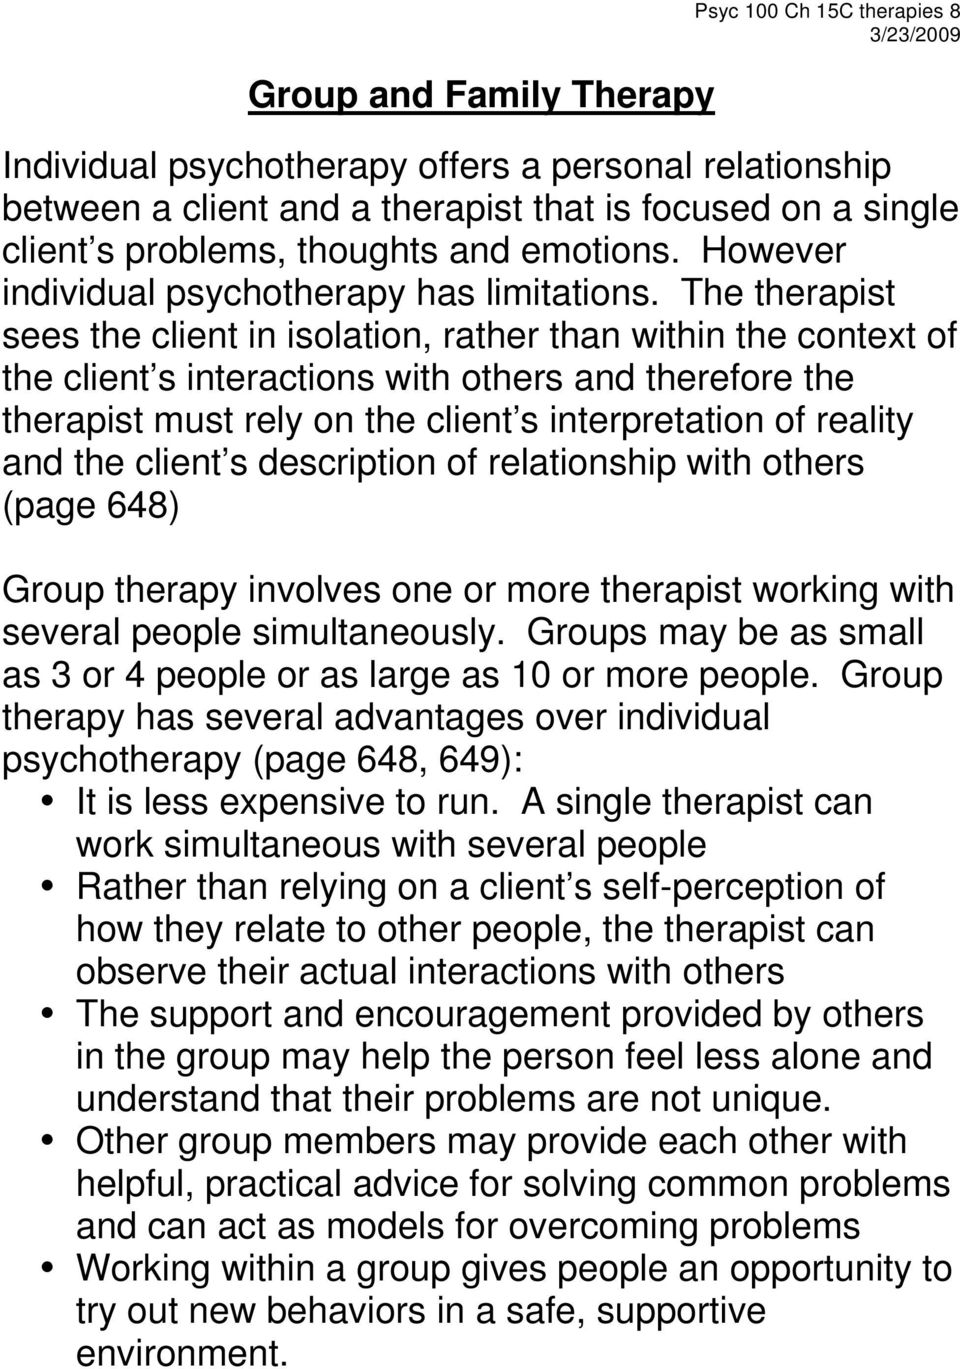 The therapist sees the client in isolation, rather than within the context of the client s interactions with others and therefore the therapist must rely on the client s interpretation of reality and